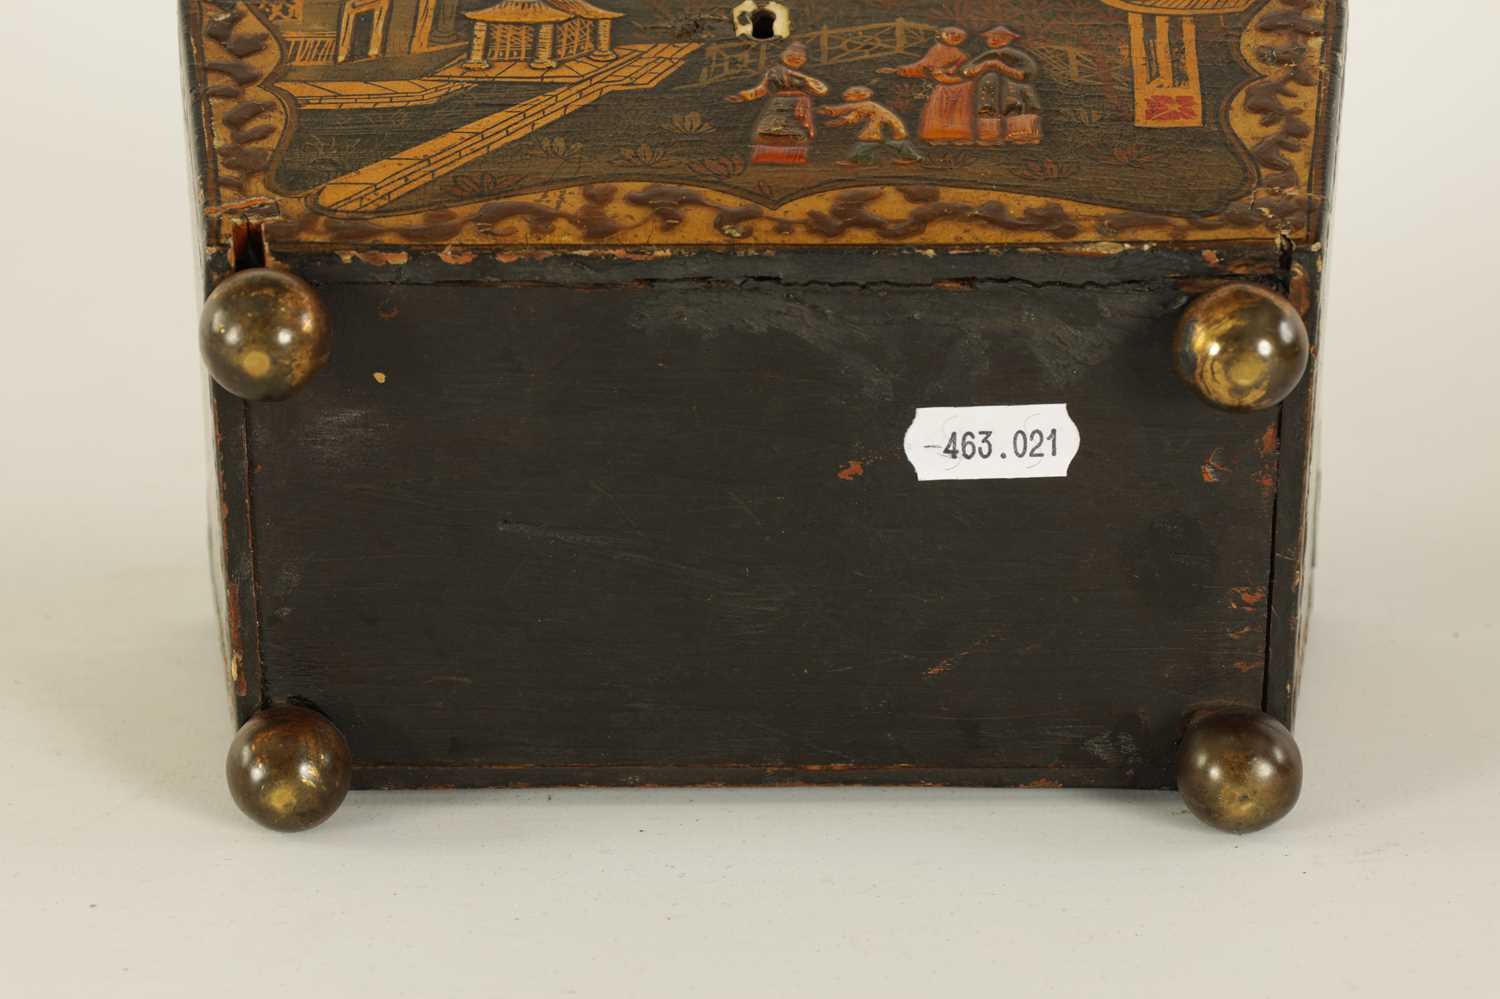 A LATE GEORGIAN CHINOISERIE DECORATED BLACK LACQUER SARCOPHAGUS TEA CADDY - Image 8 of 8